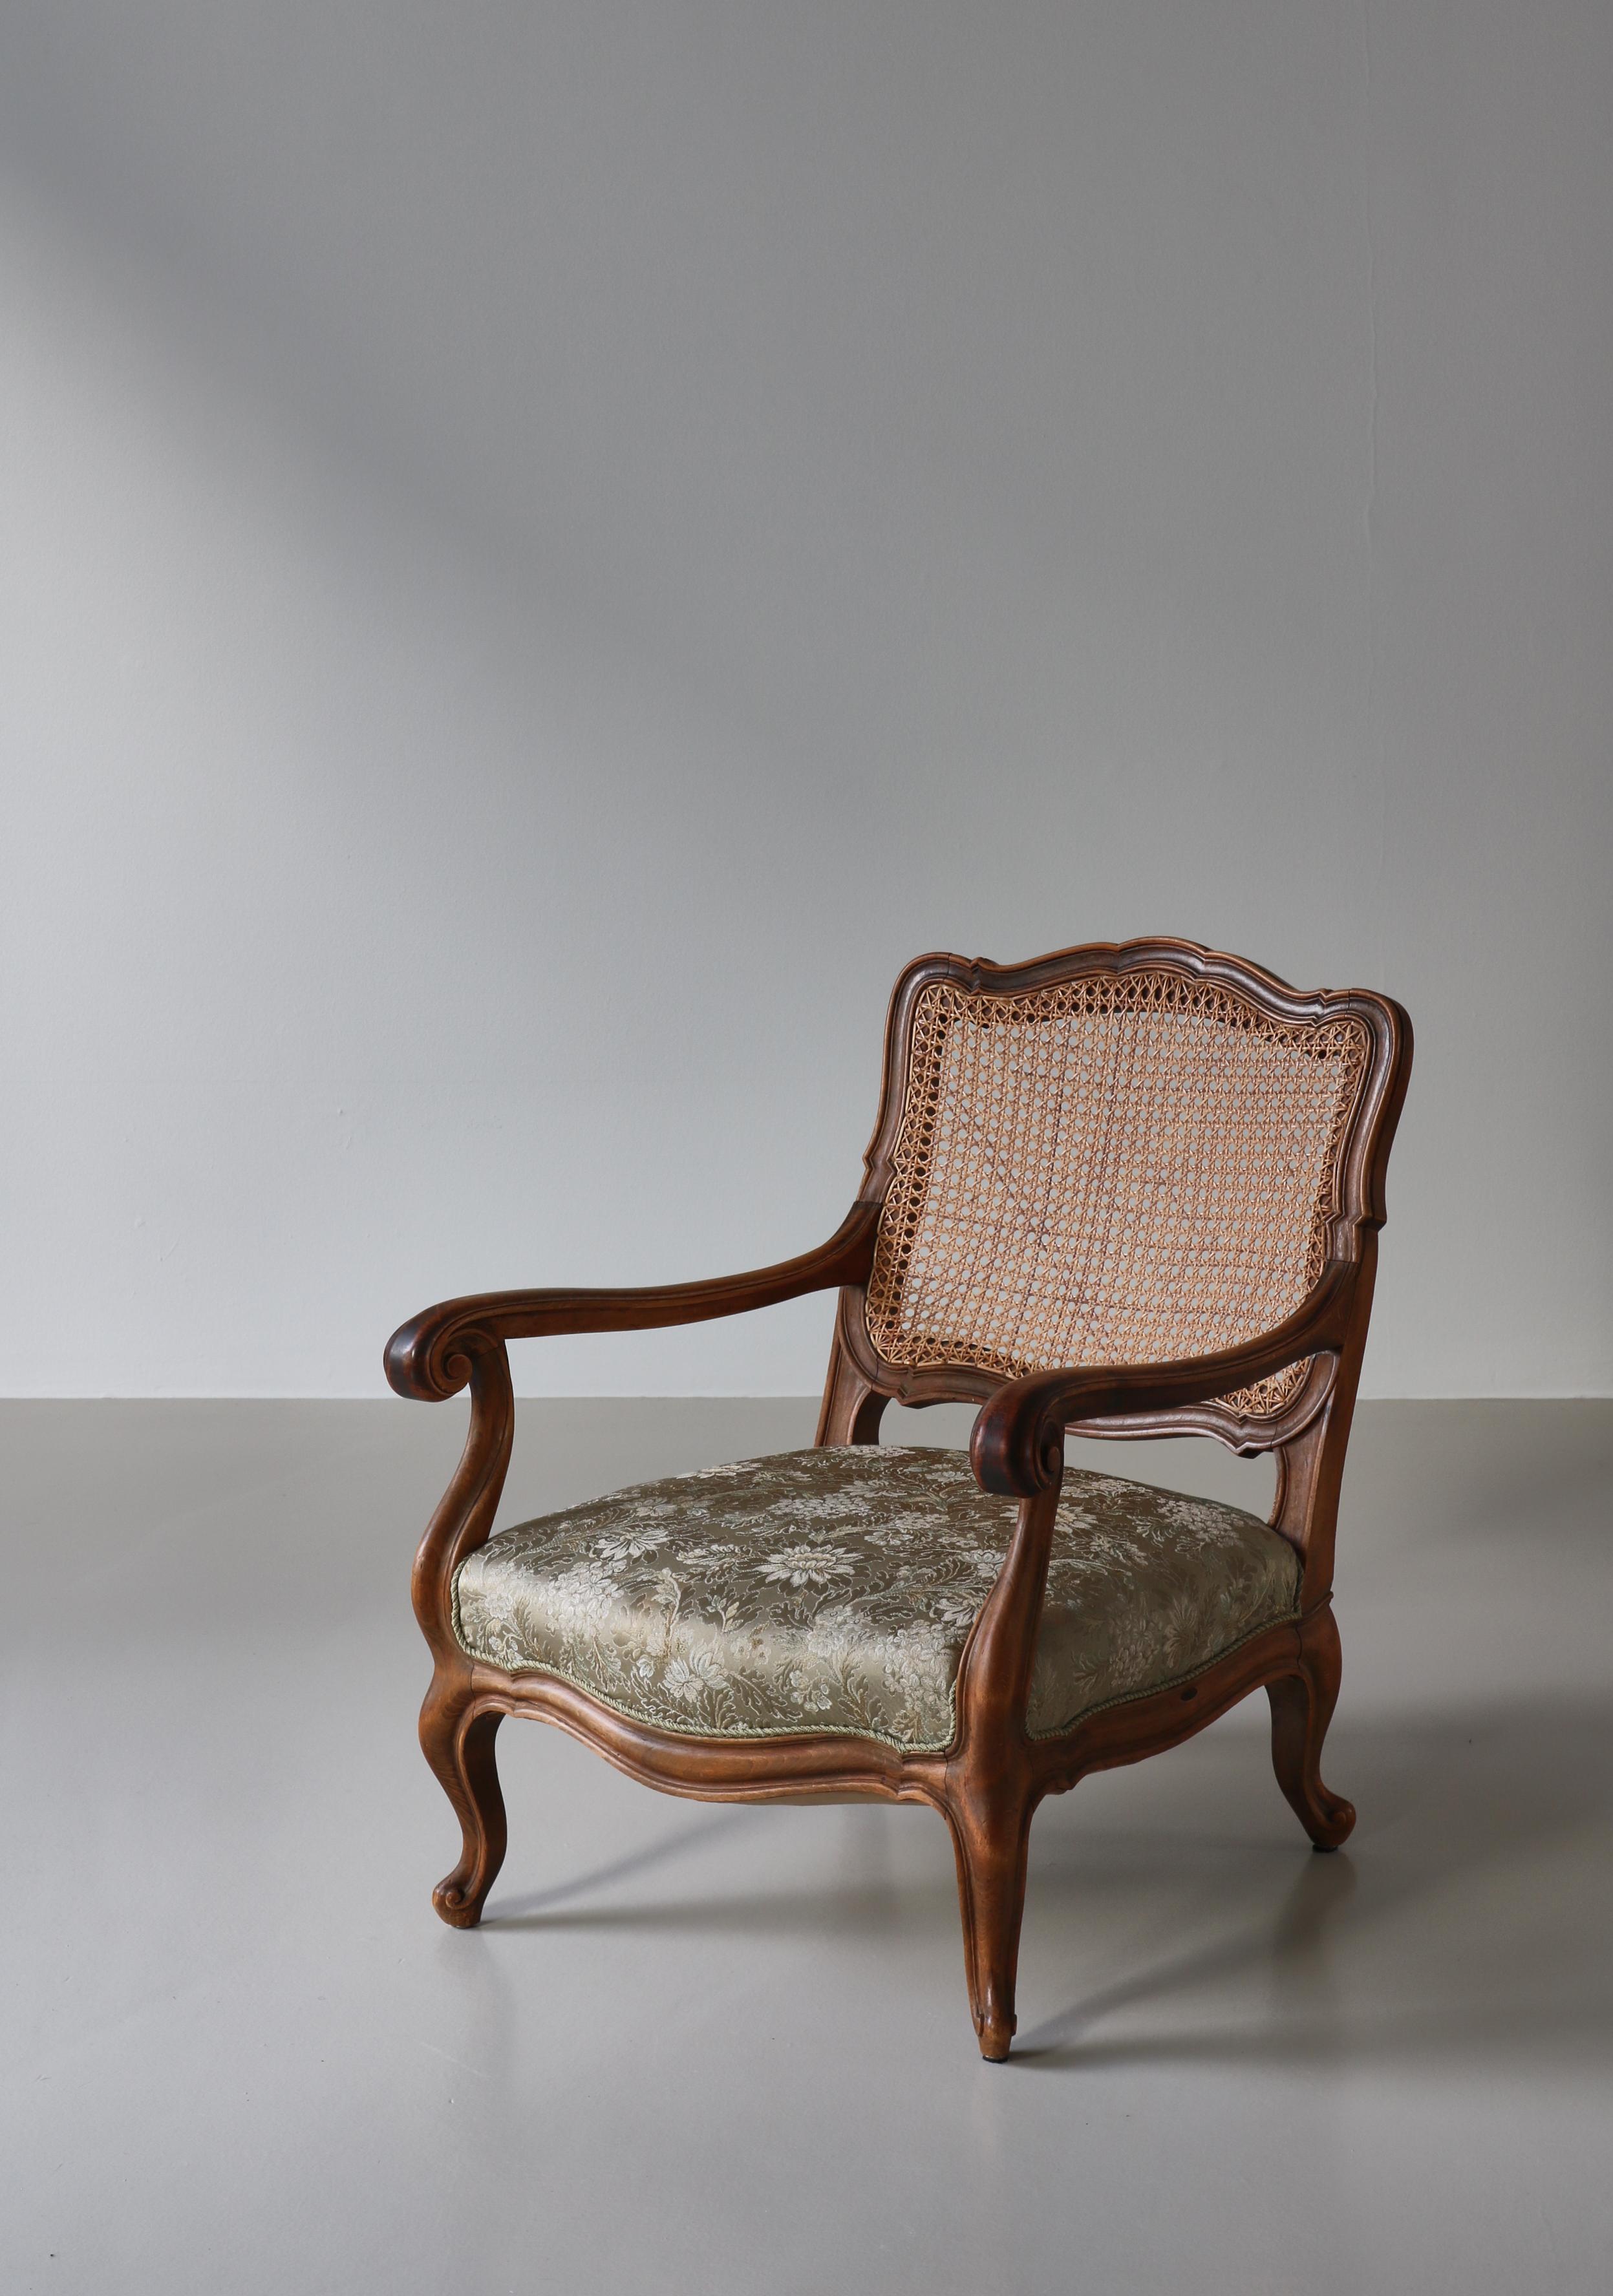 Bergére Chair Rococo Revival by Danish Cabinetmaker, Early 20th Century In Good Condition For Sale In Odense, DK